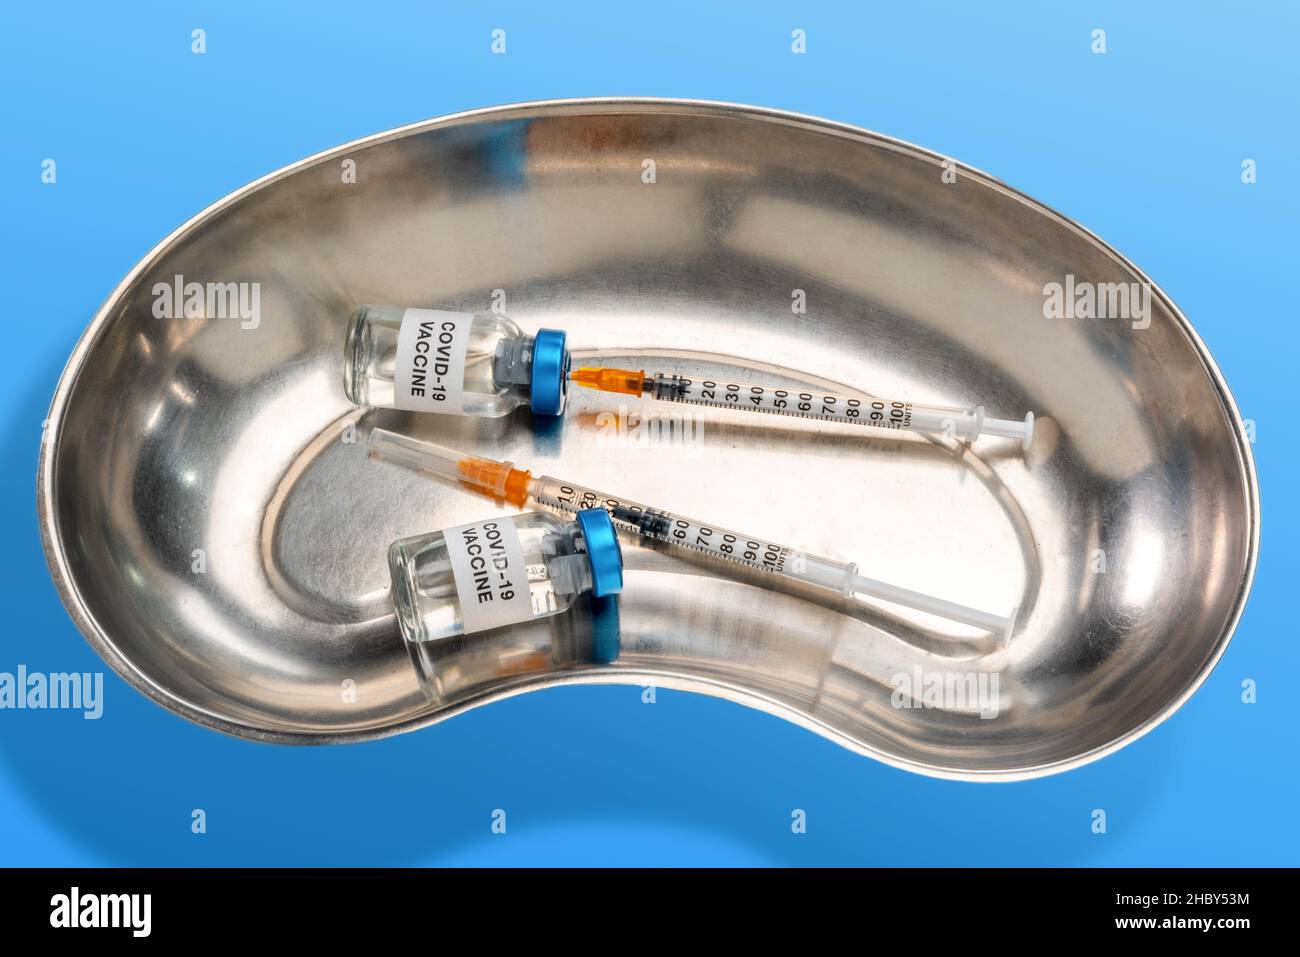 Two vaccine vials with syringe aspirating dose in stainless Medical kidney bowl, on light blue backgroud Stock Photo